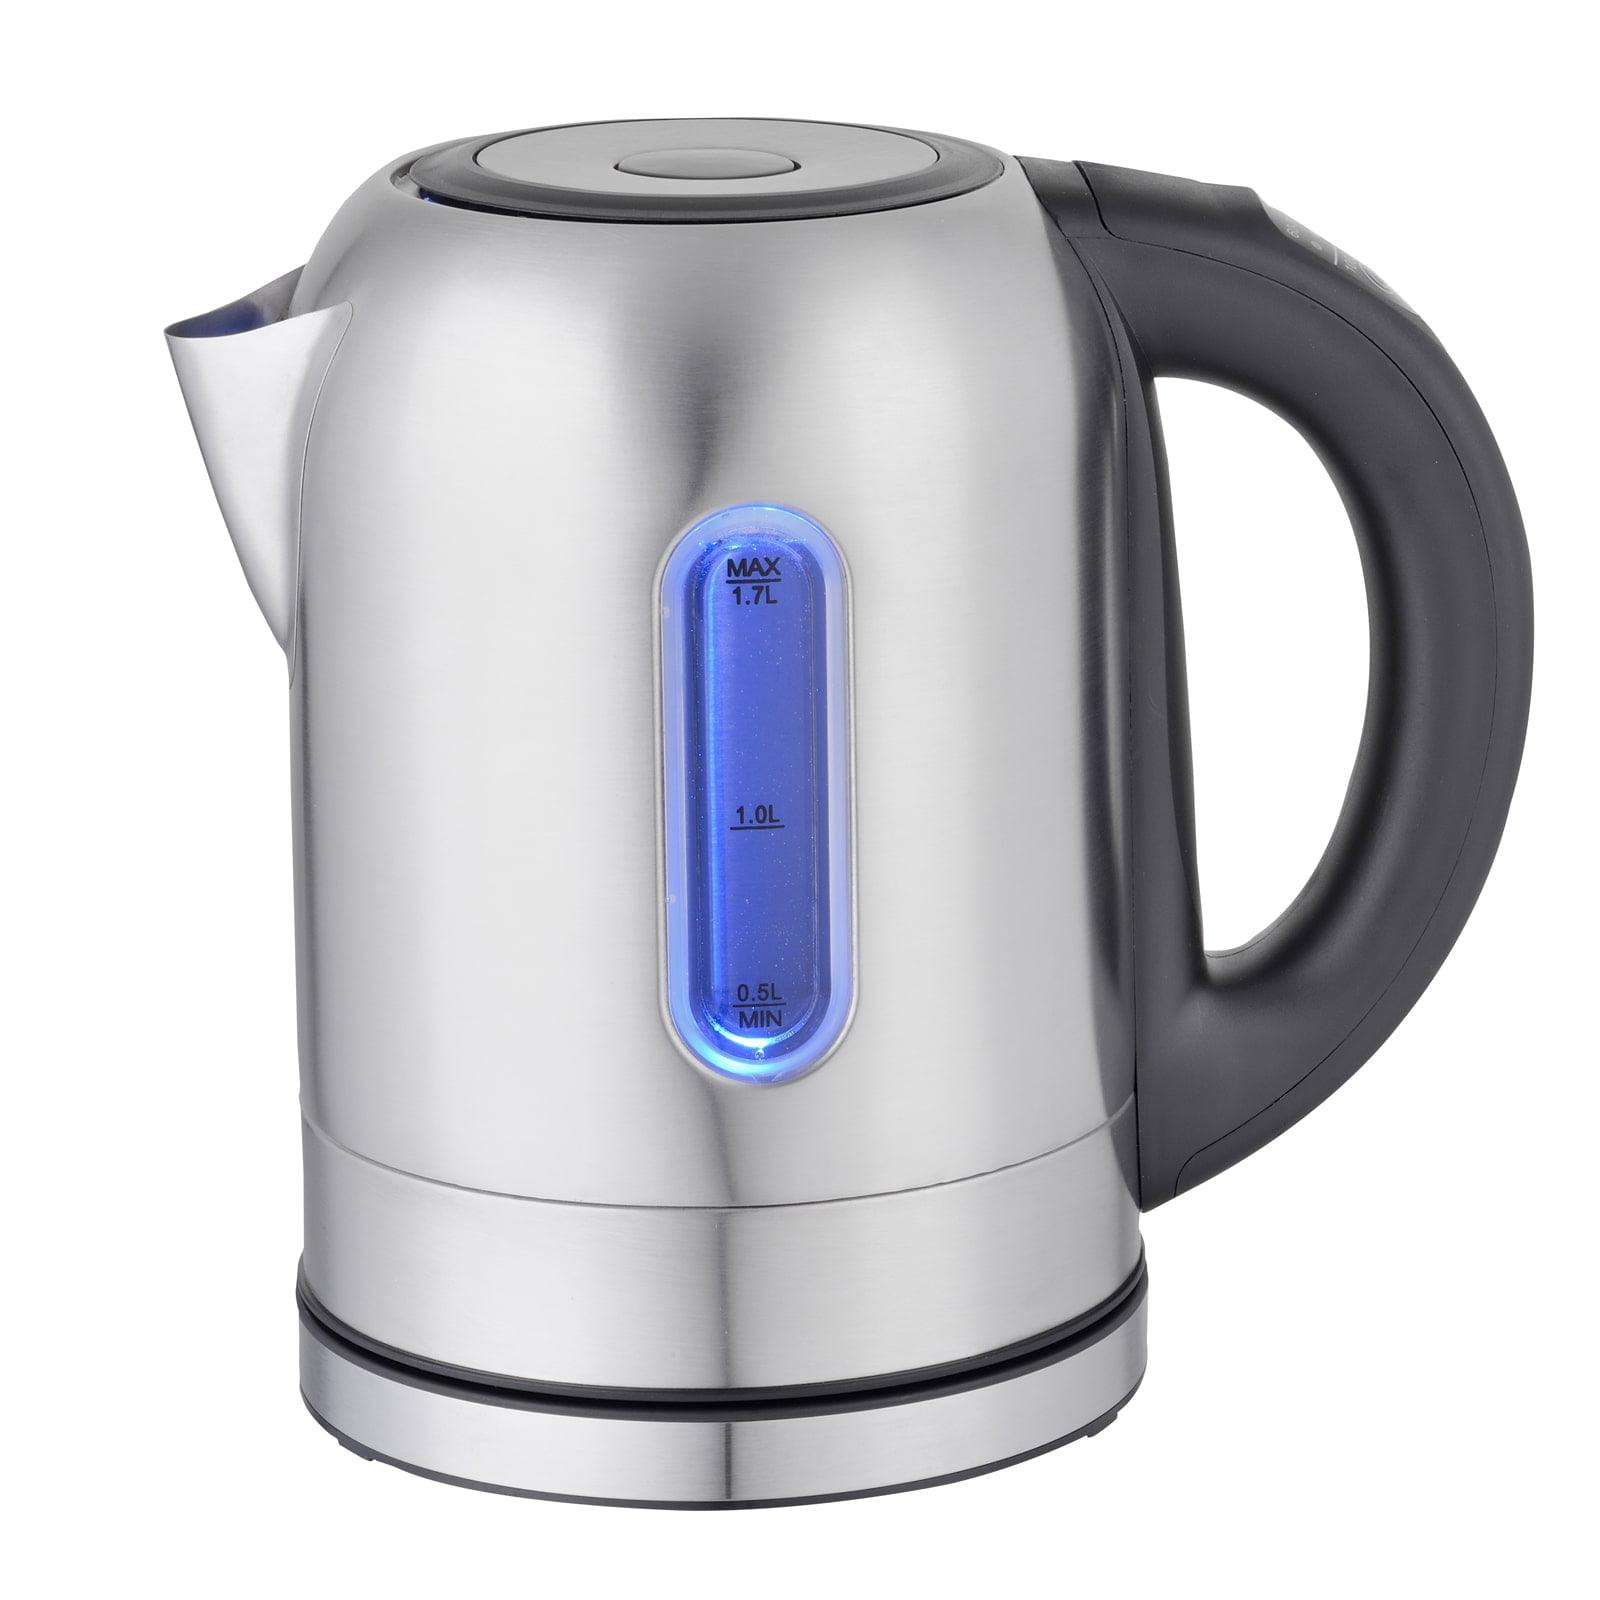 MegaChef 1.9 Quarts Stainless Steel Electric Tea Kettle & Reviews